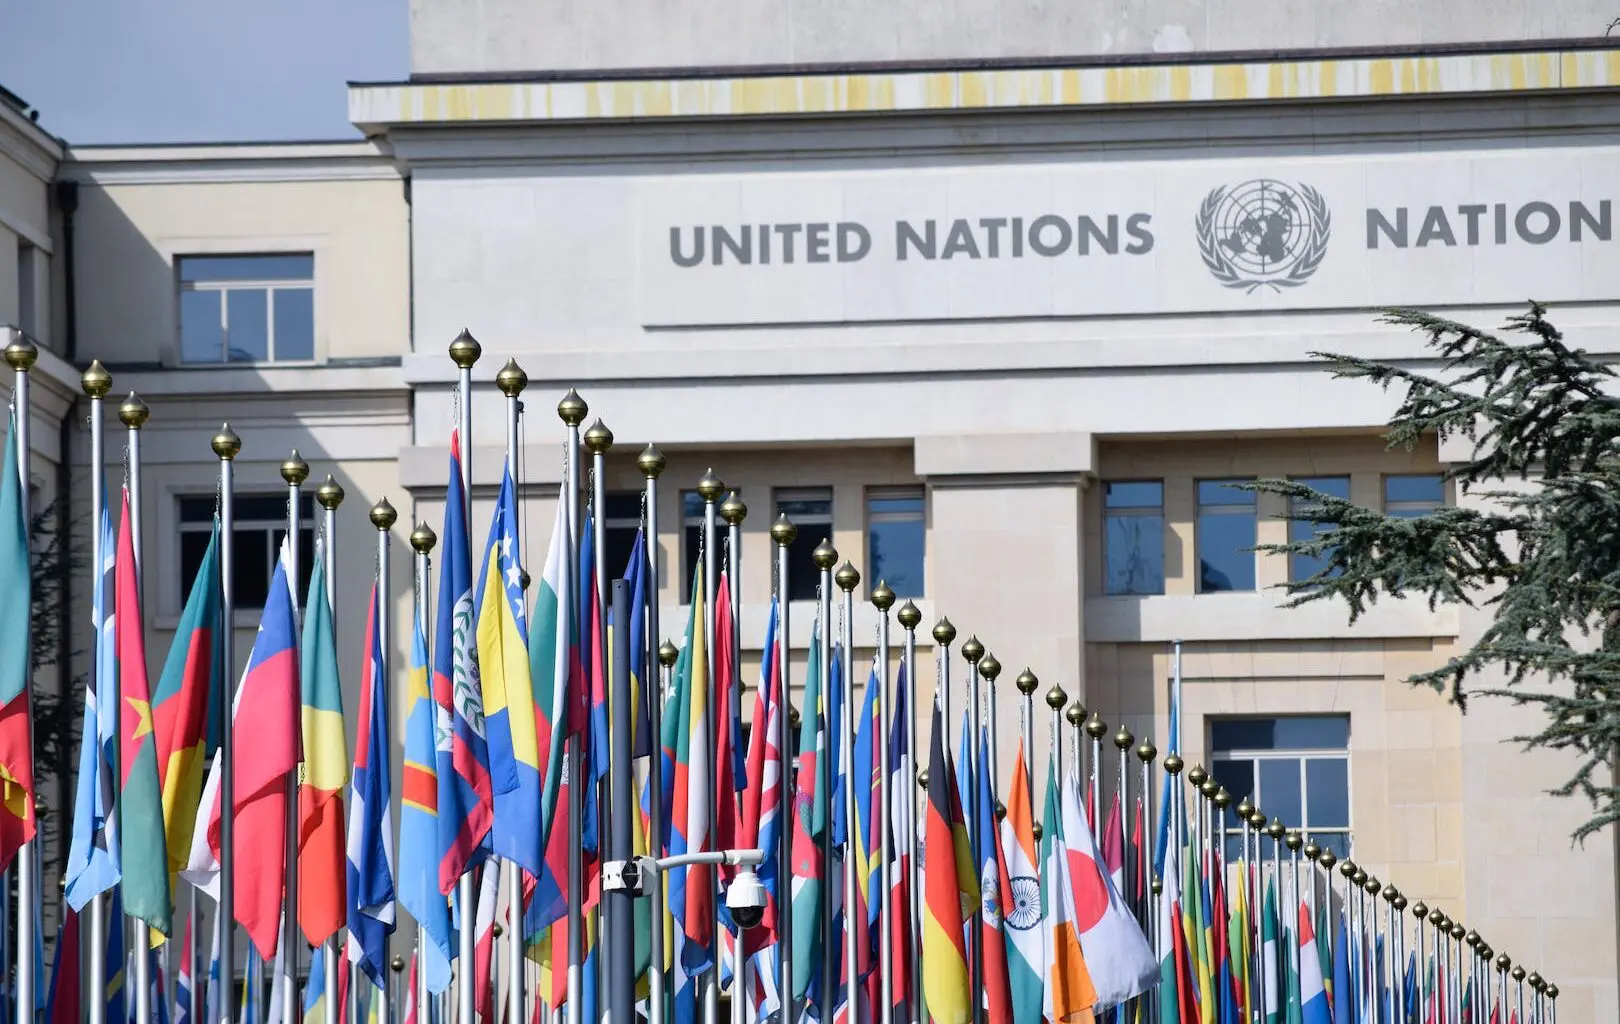 The image shows a row of international flags in front of the United Nations building.